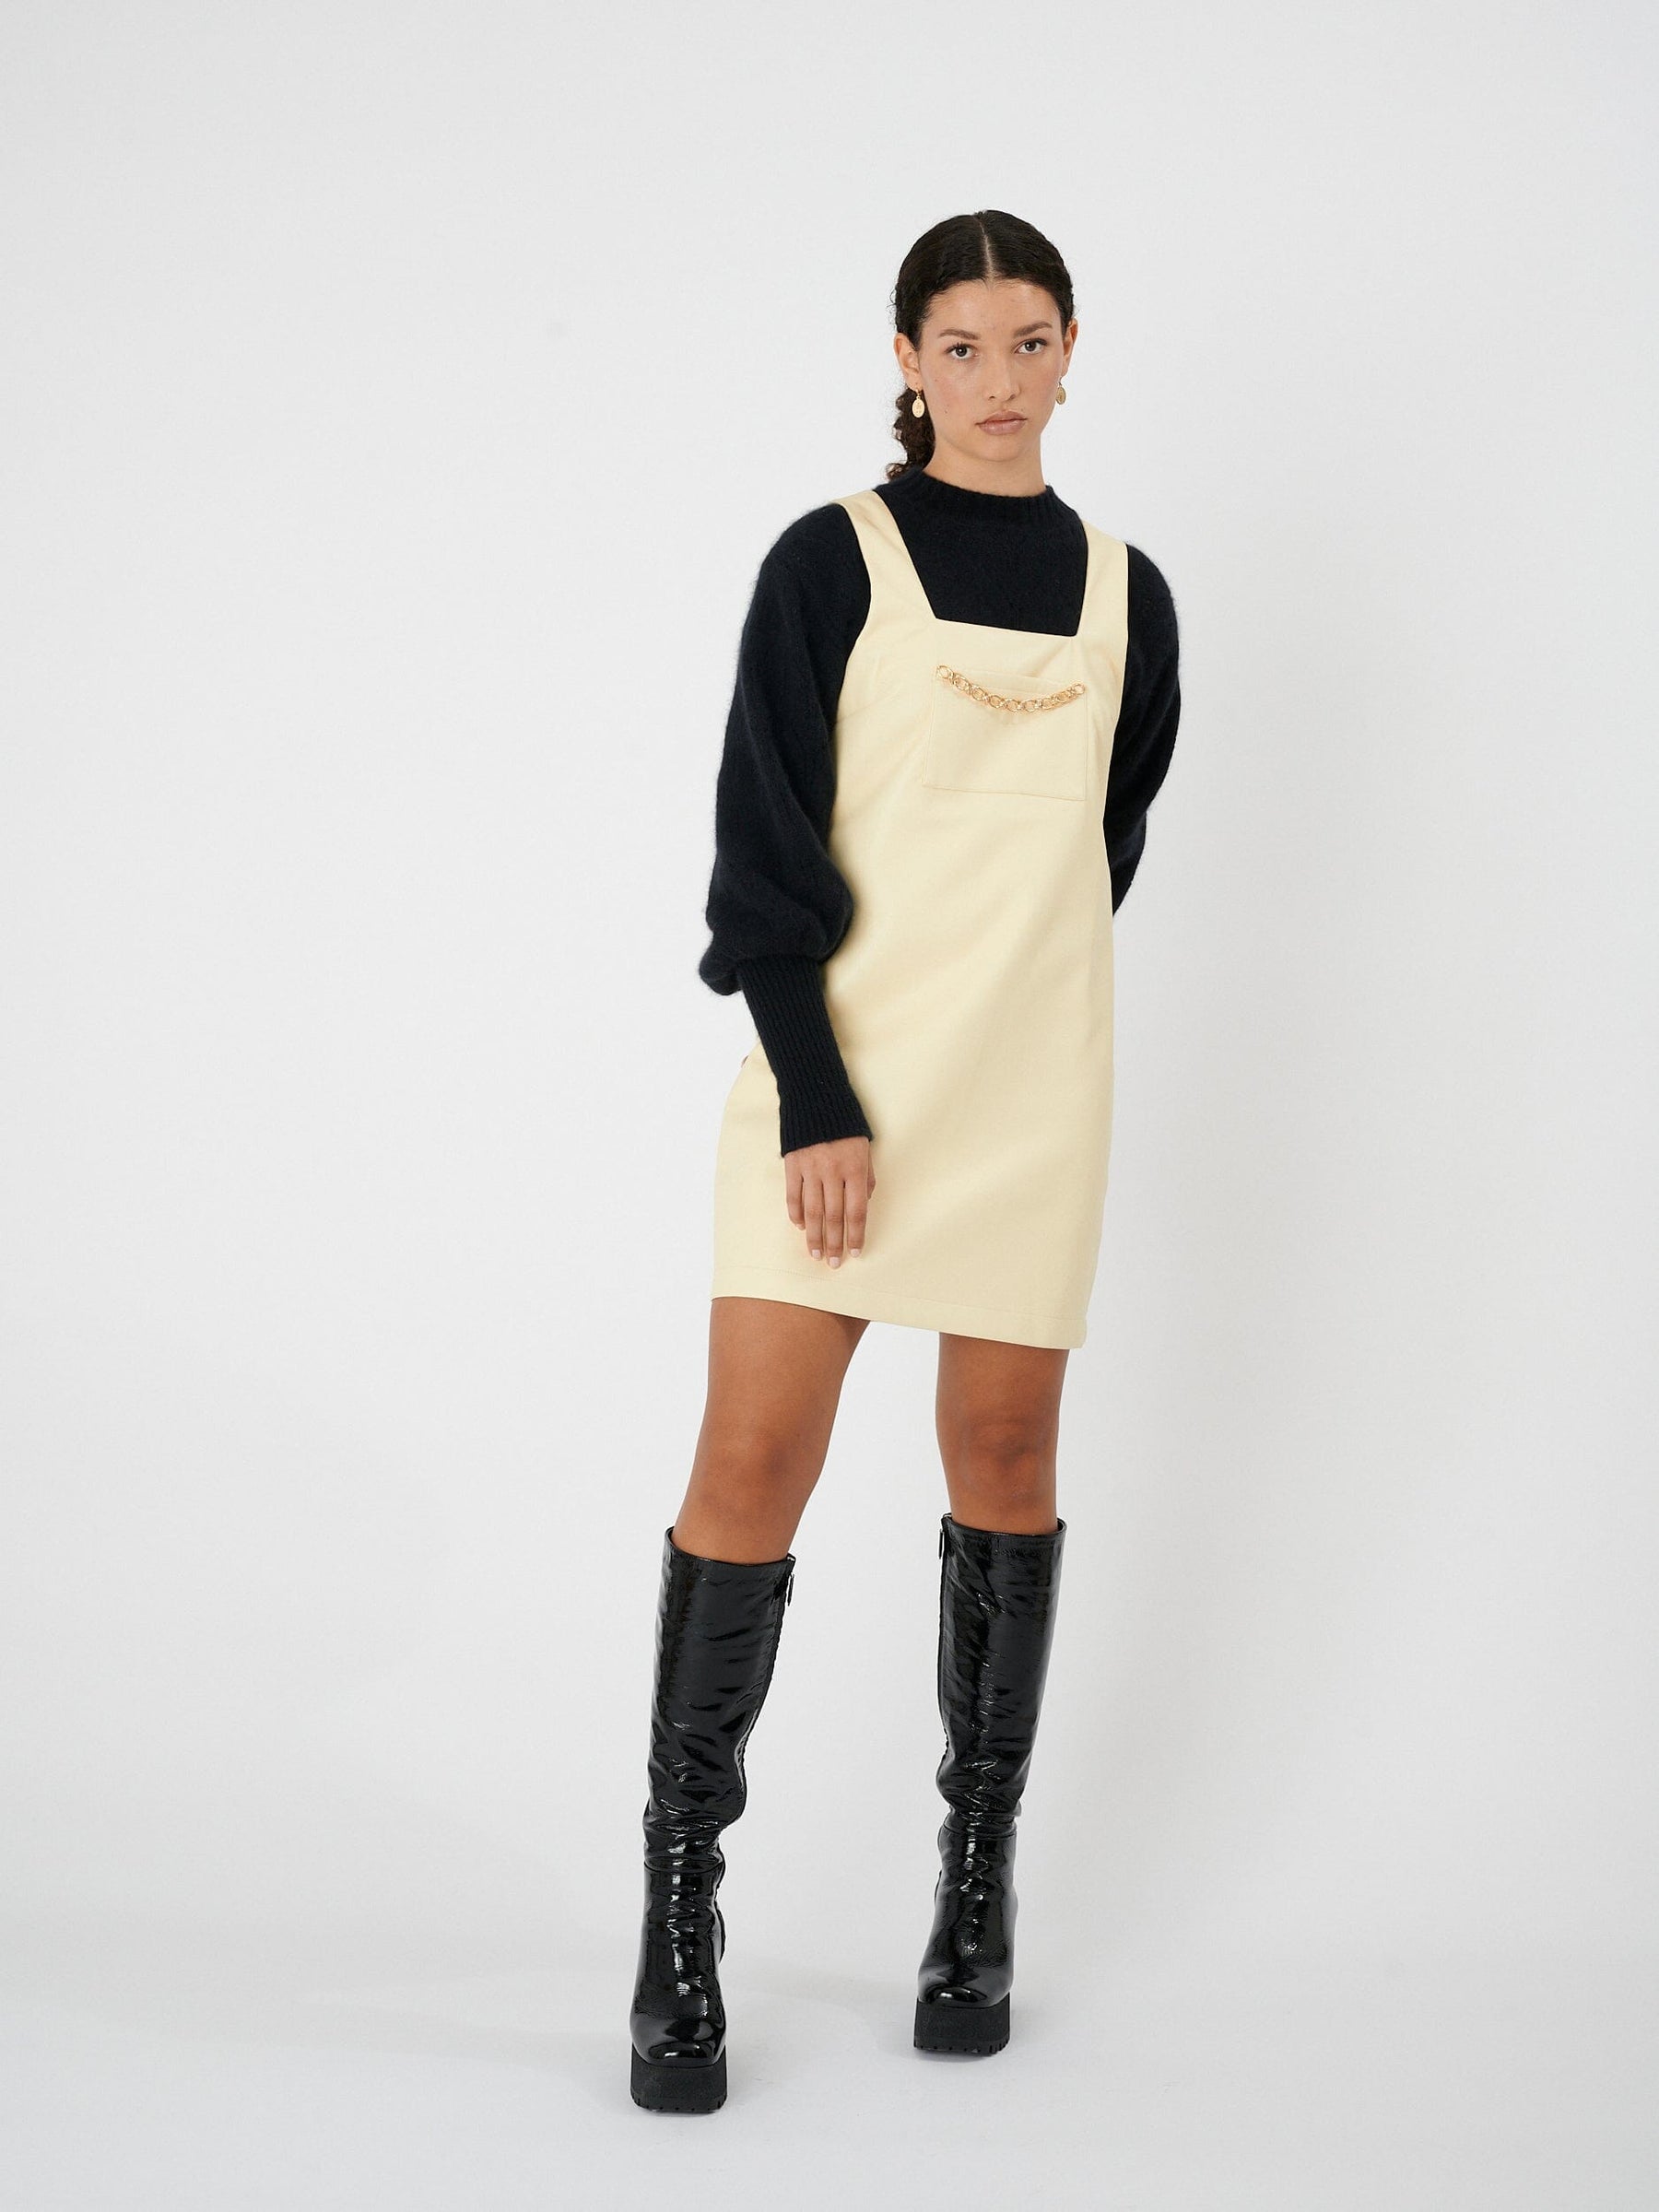 SASHA - Chasuble dress with gold chain in recycled leather Yellow Dress Fête Impériale